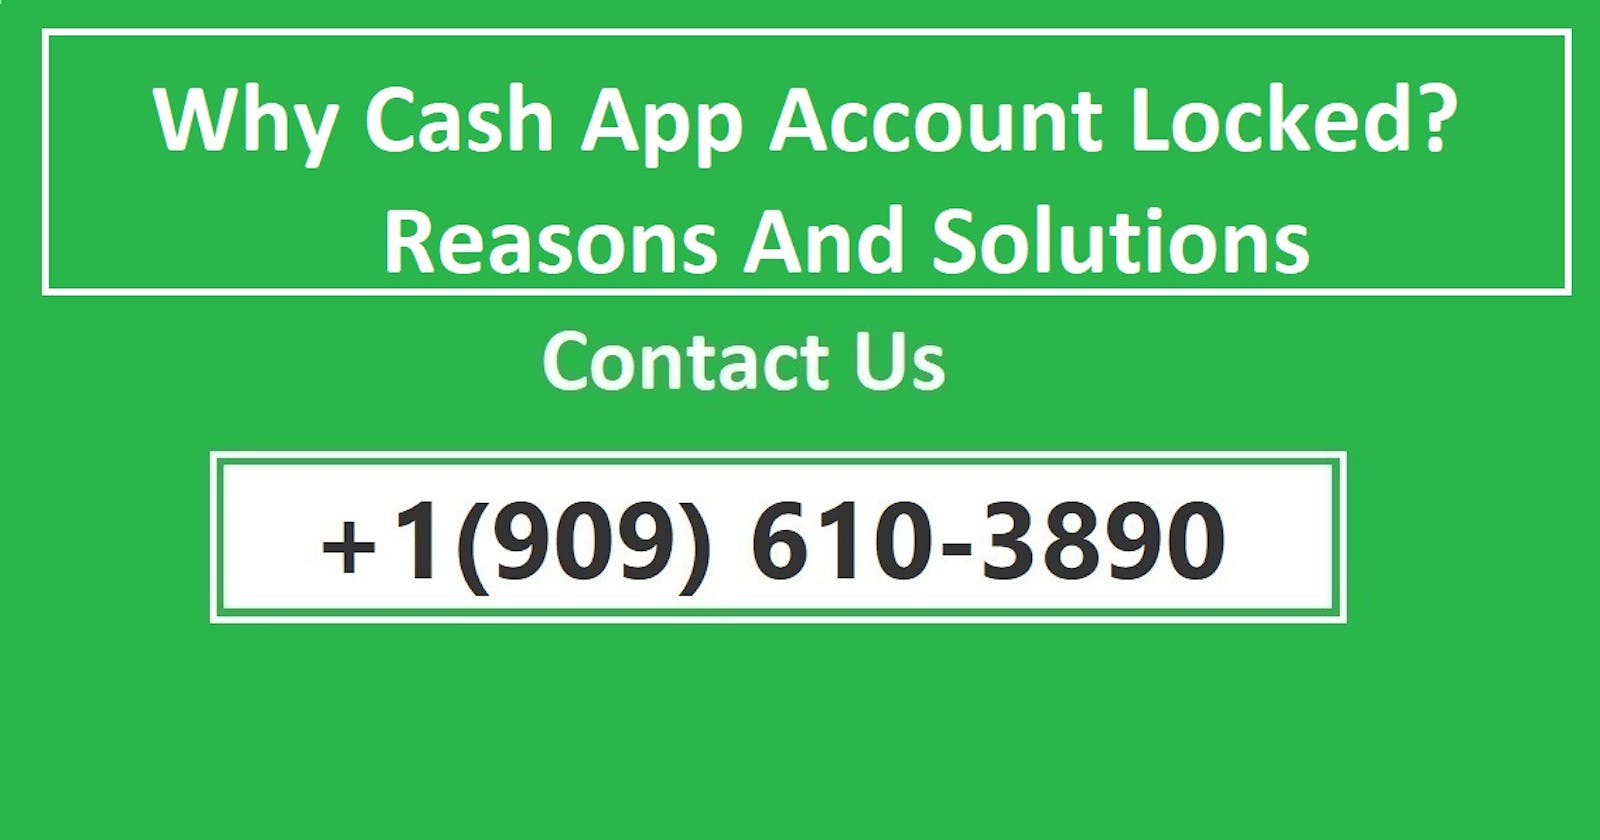 Reasons And Solutions Why Cash App Account Locked?